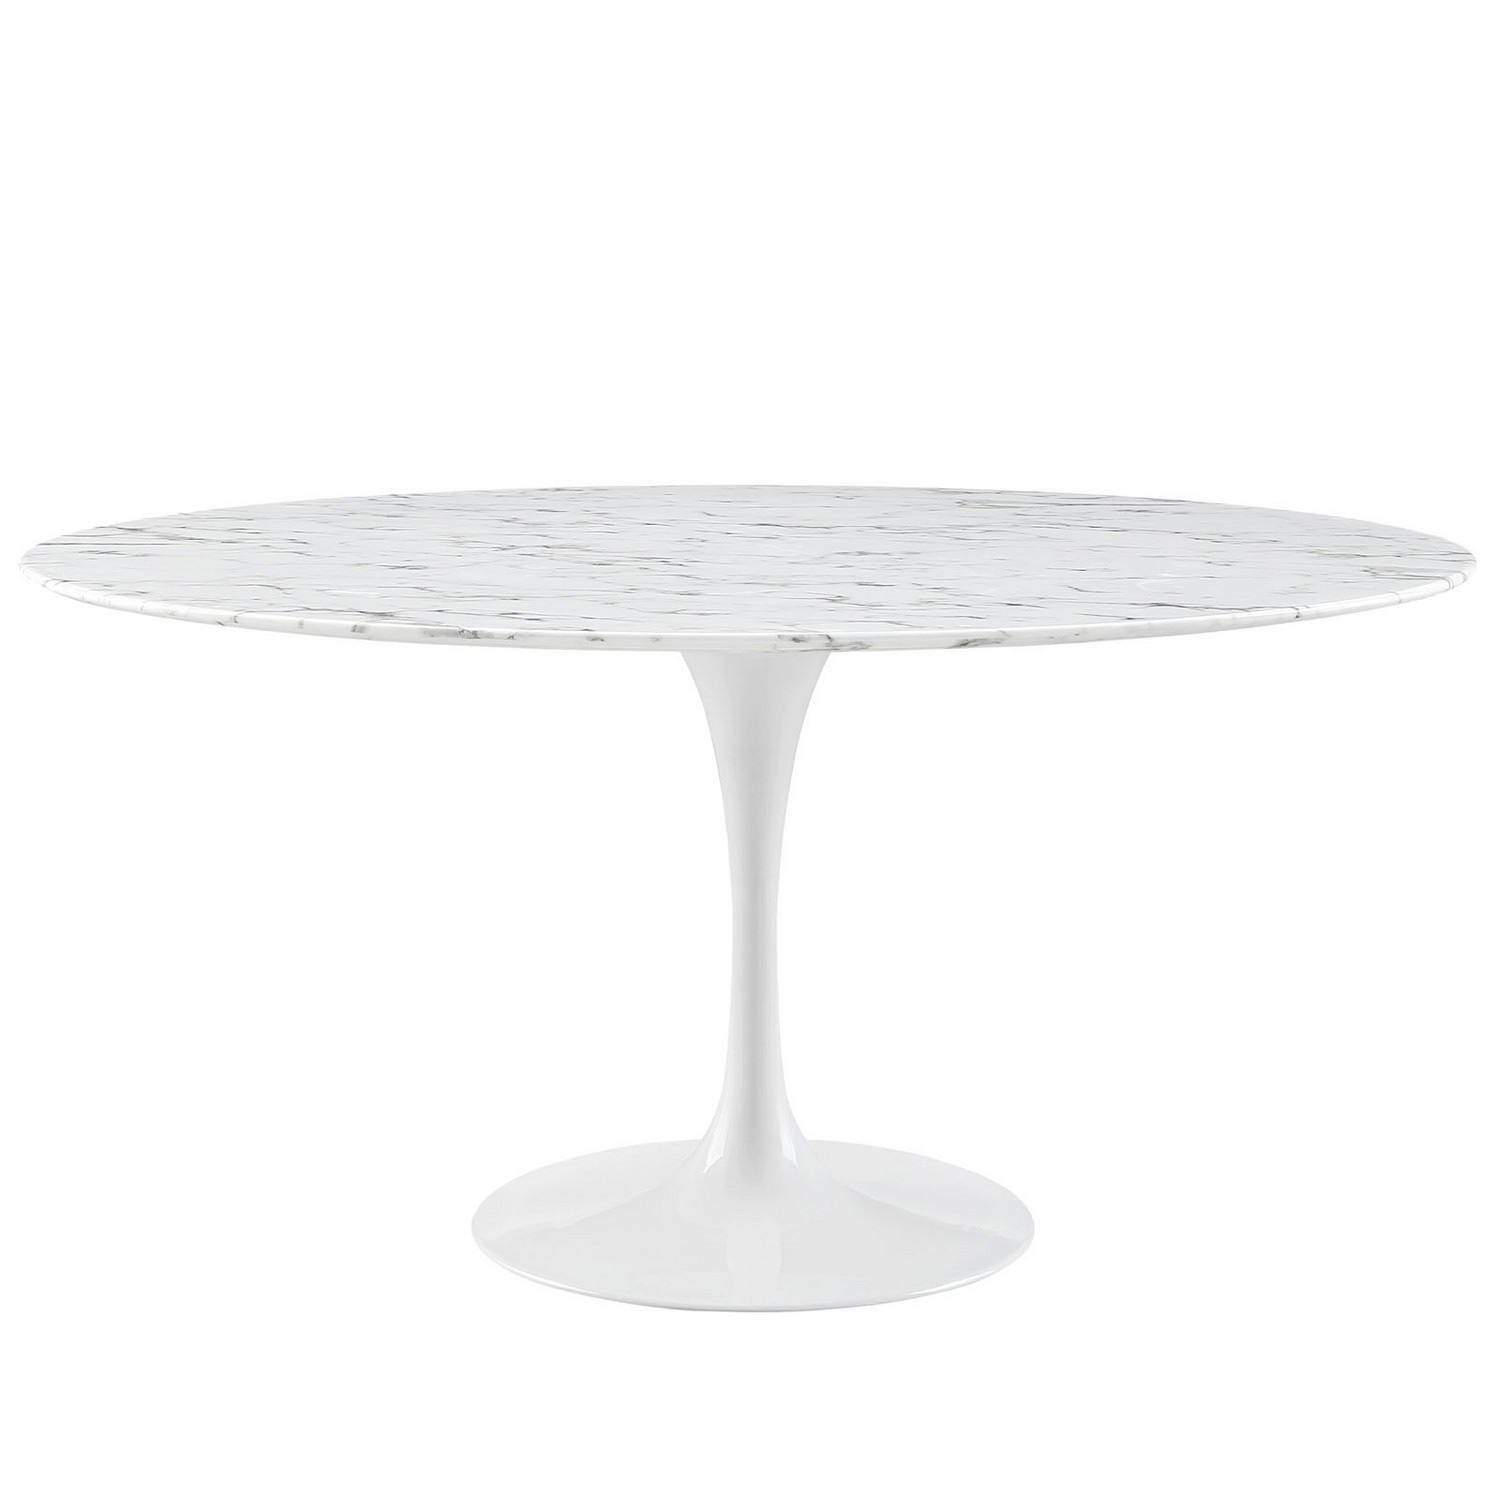 Modway Lippa 60 Artificial Marble Dining Table - White